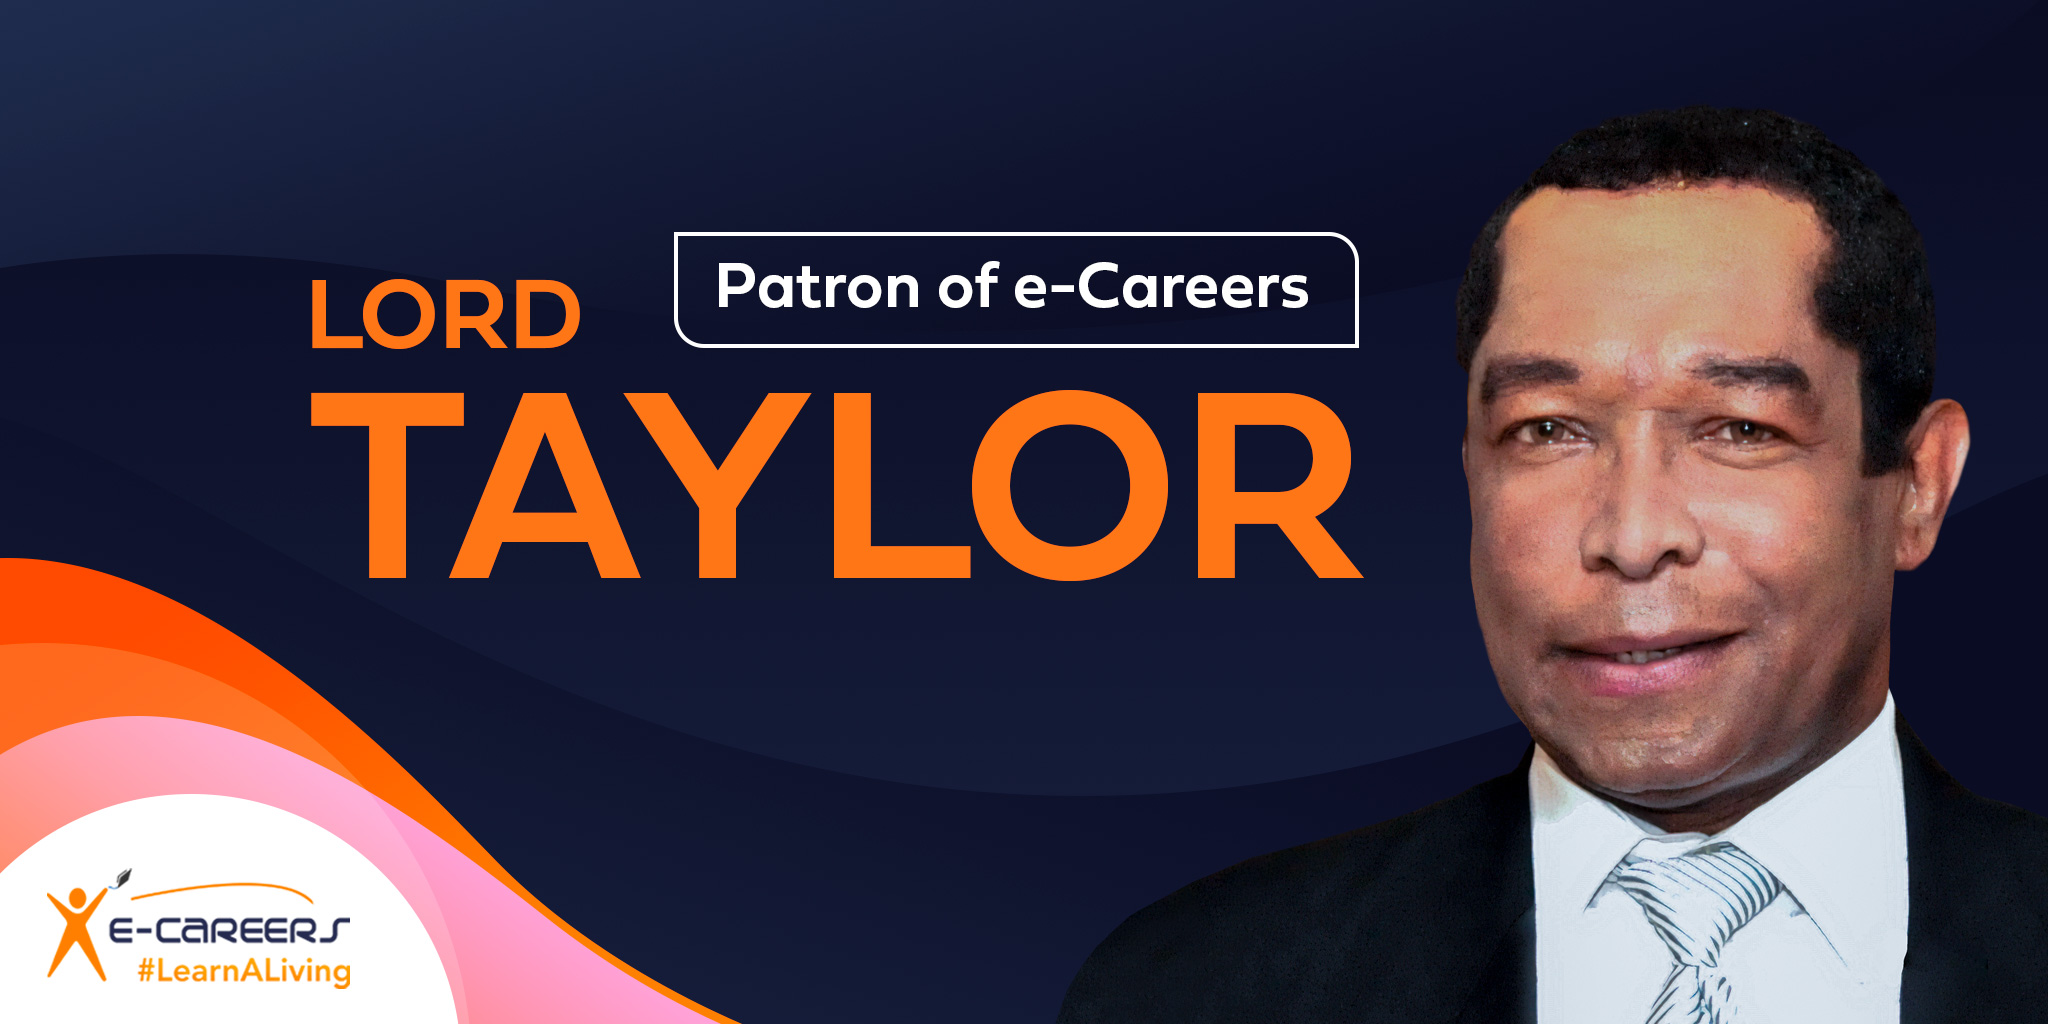 LORD TAYLOR JOINS THE DRIVE TO UPSKILL THE NATION